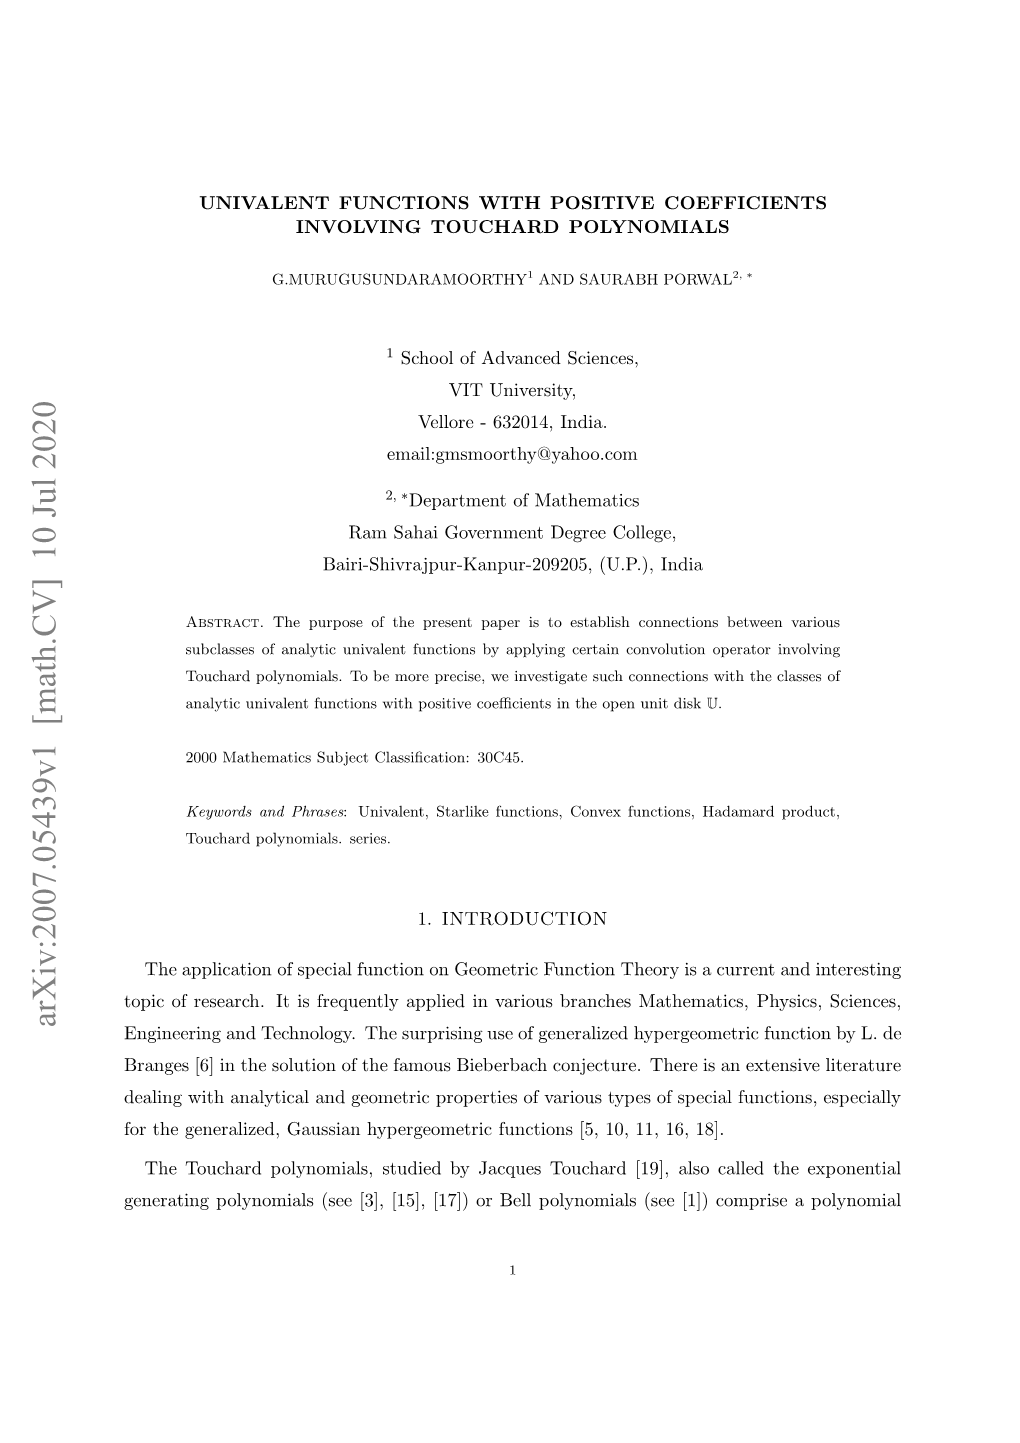 Univalent Functions with Positive Coefficients Involving Touchard